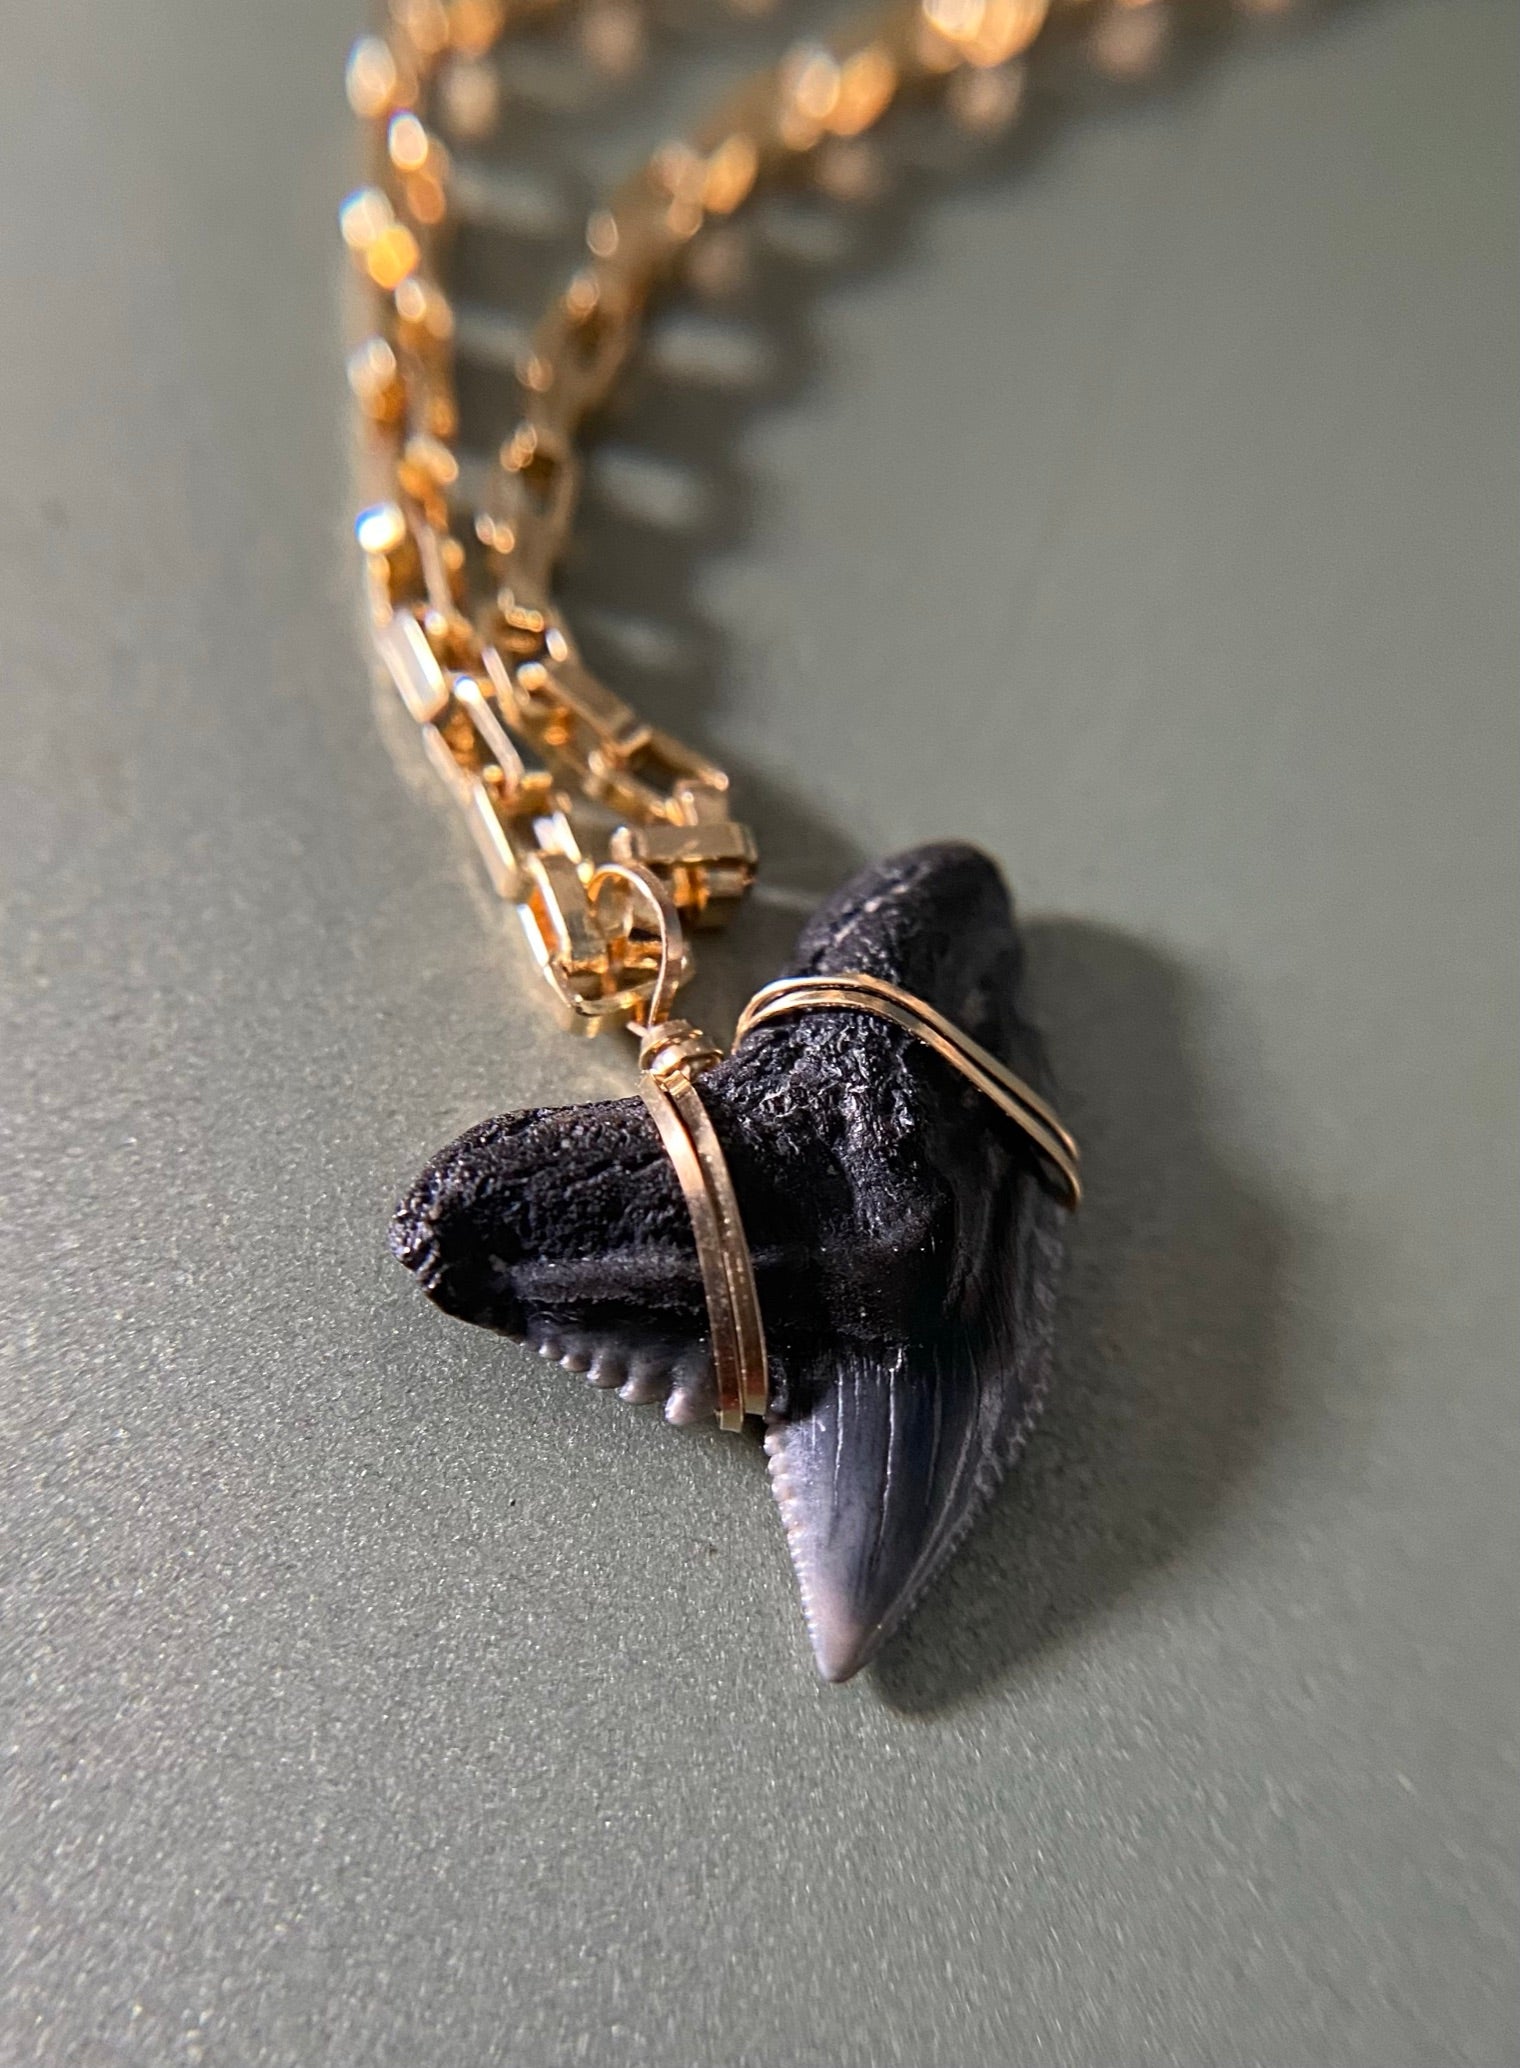 MEGALODON SHARK TOOTH NECKLACE 1 1/4